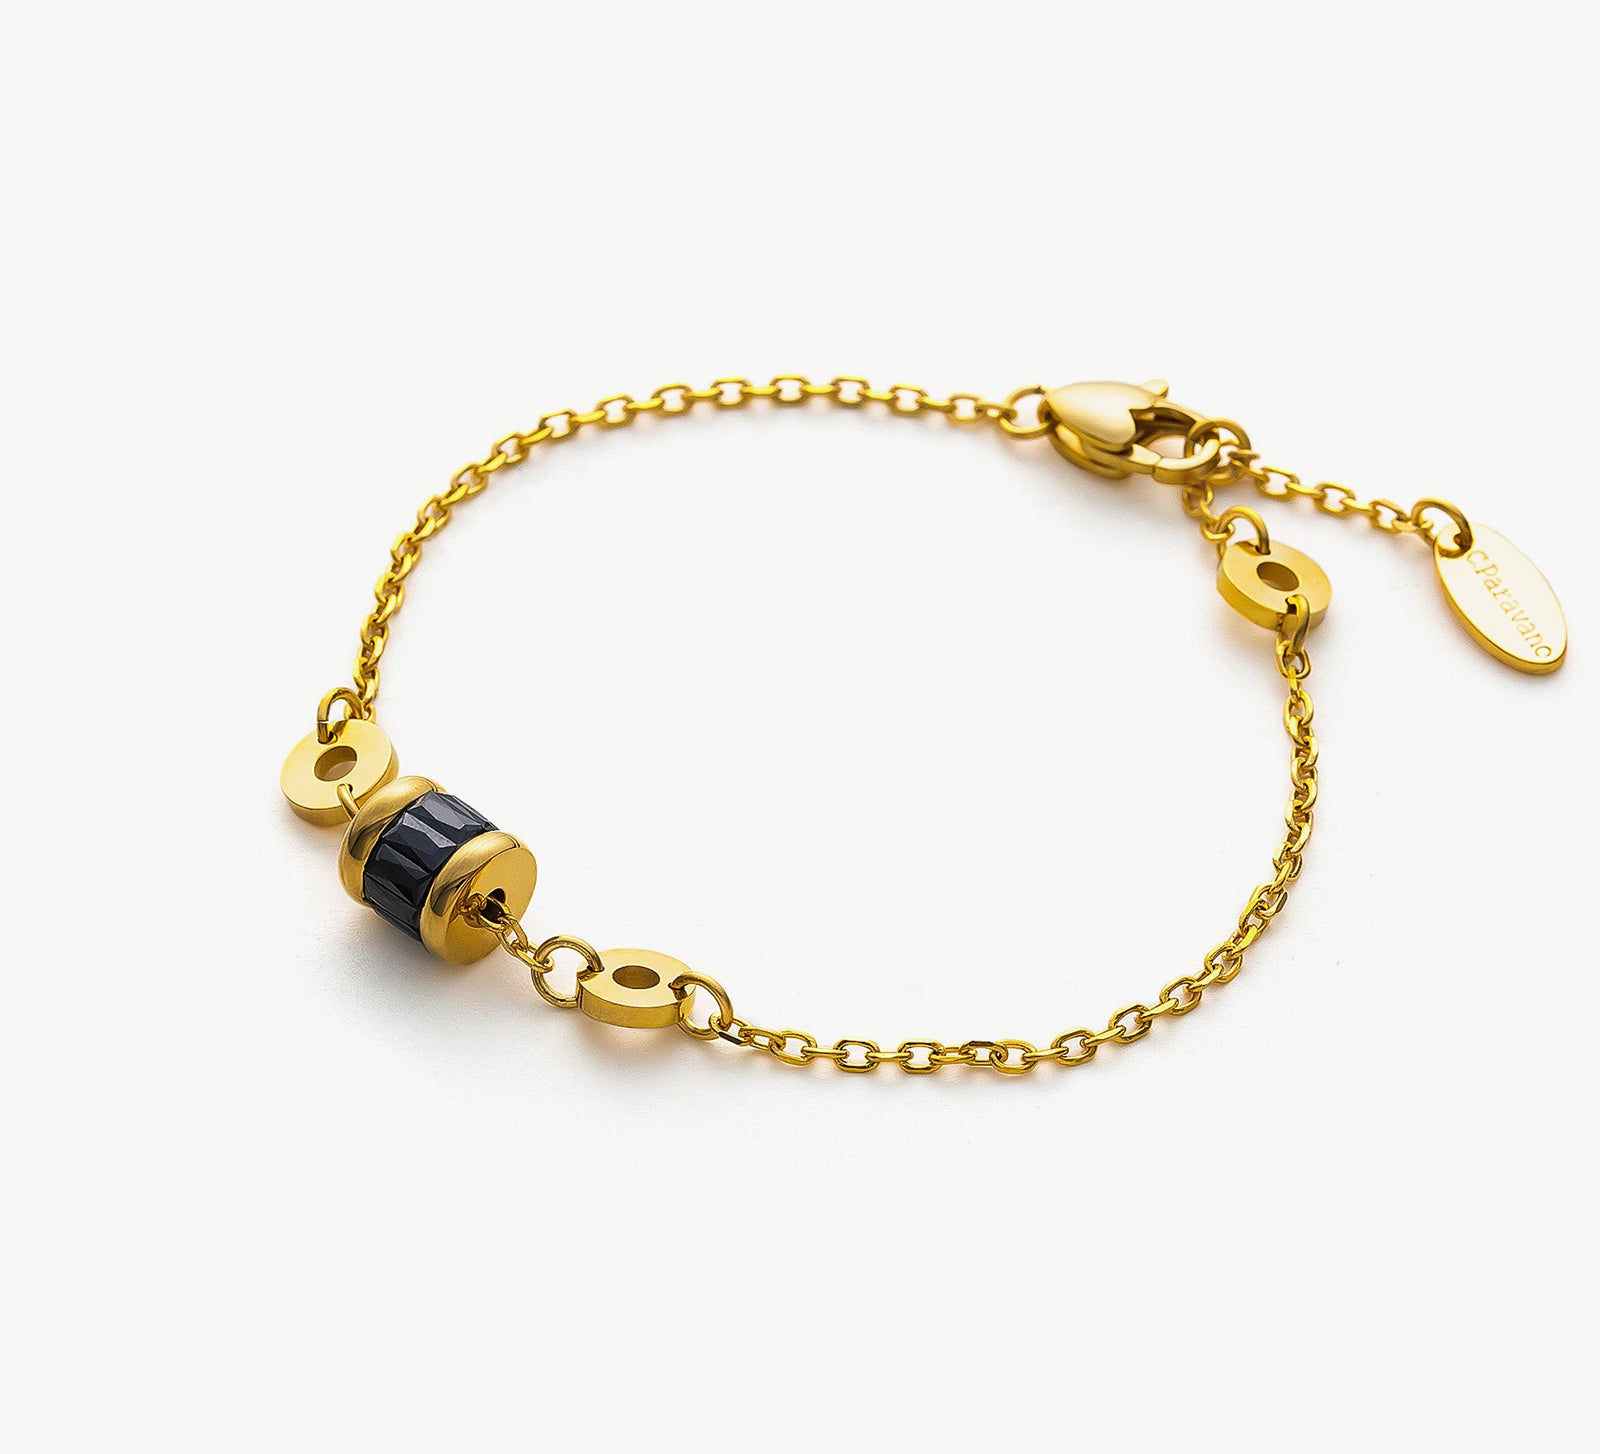 Agate Bracelet with Gold and Black, embracing with a touch of luxe, this bracelet combines the richness of gold and the timeless beauty of black agate gemstones, making it an exquisite addition to your vintage-inspired jewelry collection